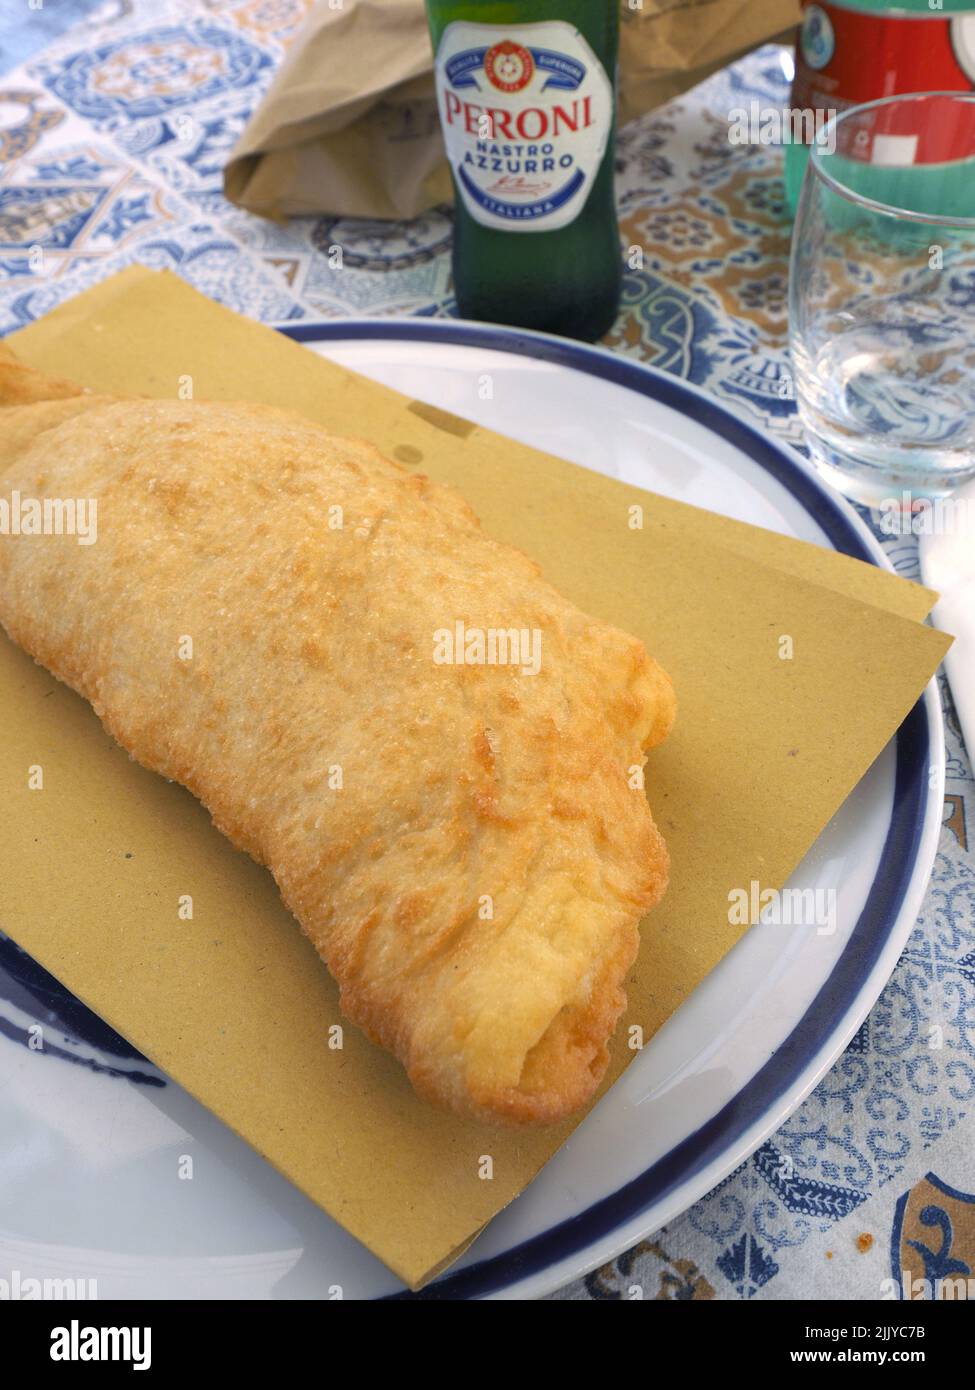 Pizza Fritta, or deep-fried pizza, is a famous Neapolitan food specialty. Naples, Campania, Italy Stock Photo